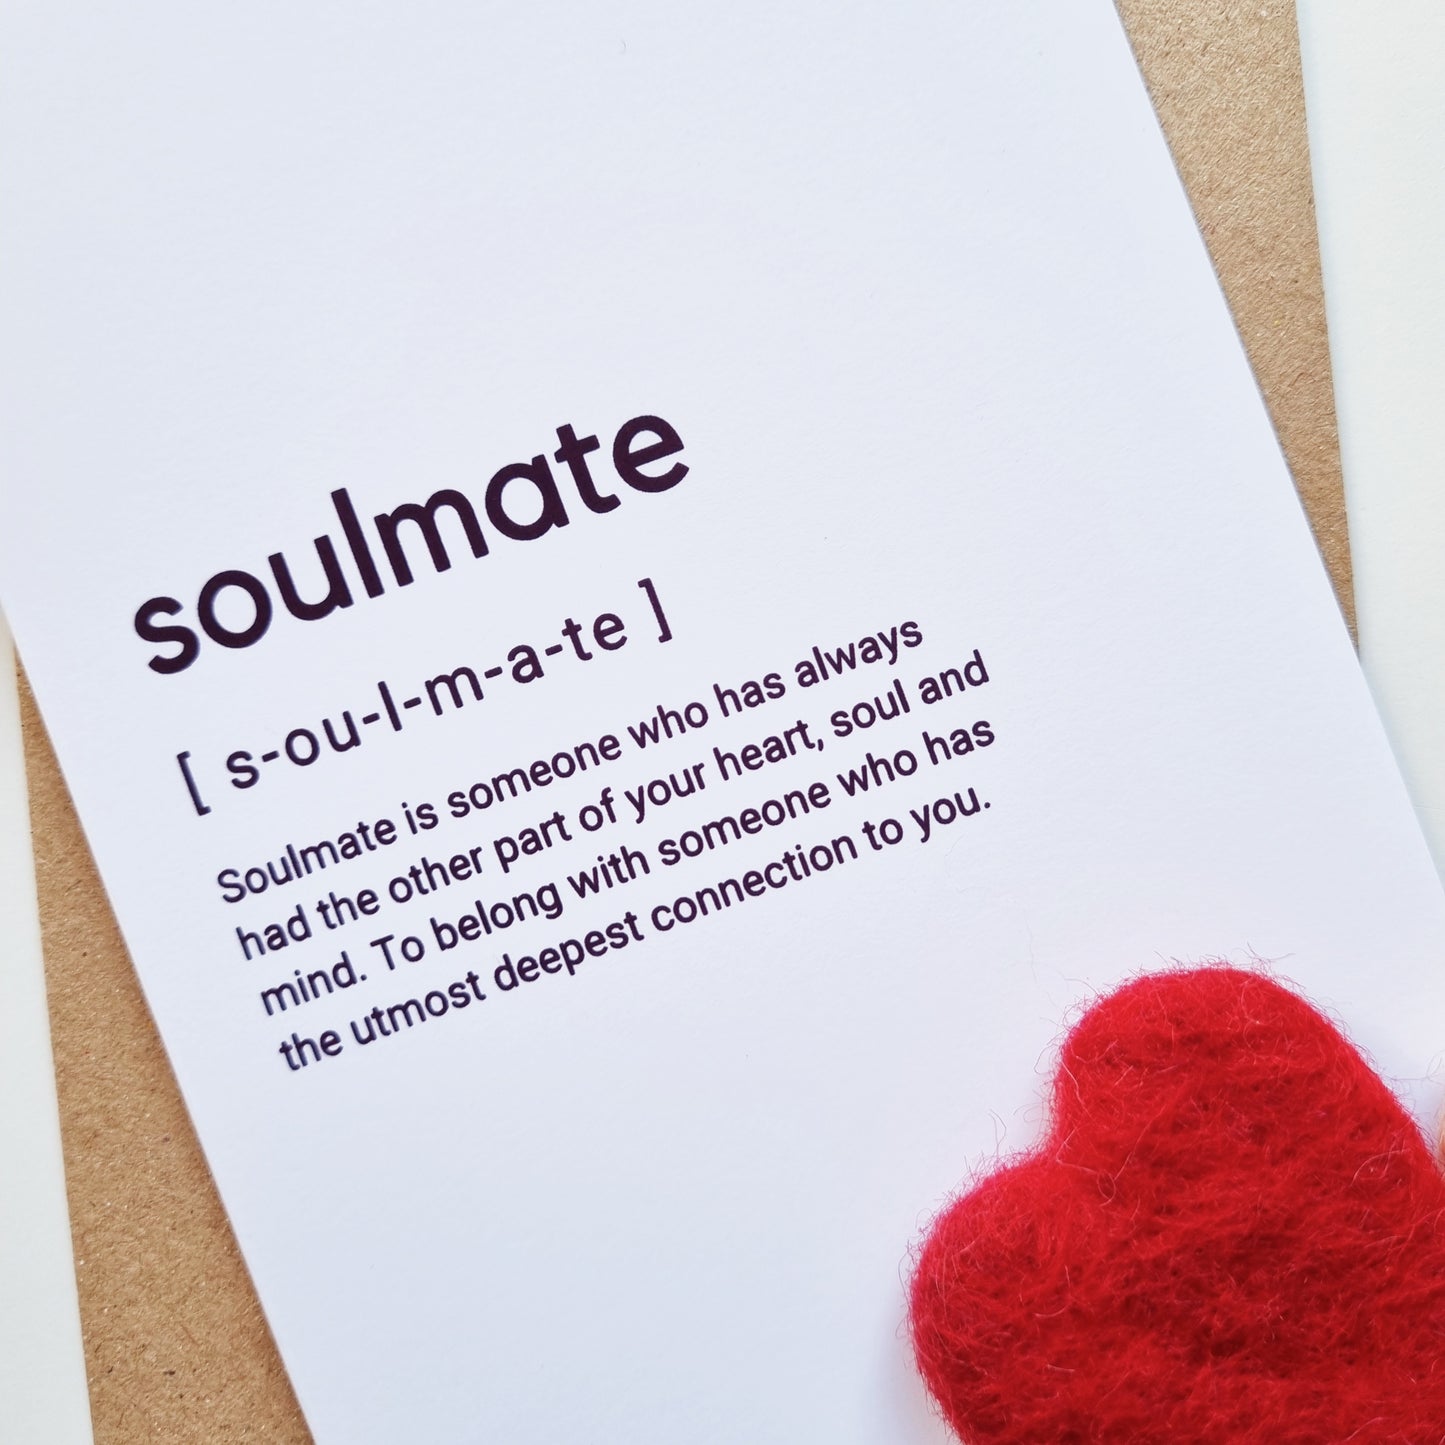 Soulmate - A6 Typography Greeting Card